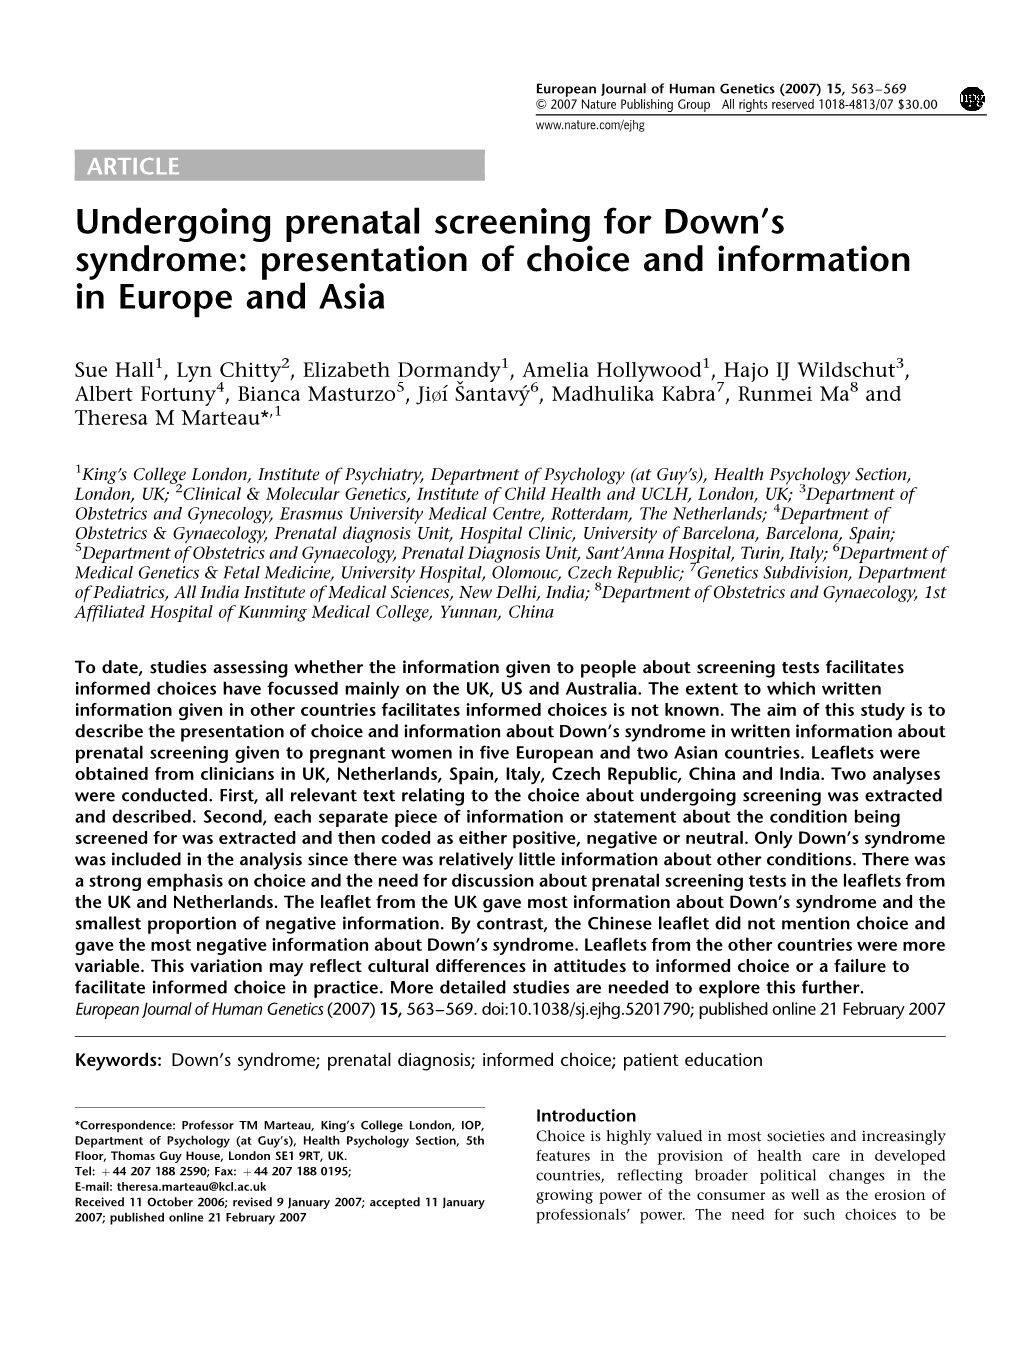 Undergoing Prenatal Screening for Down's Syndrome